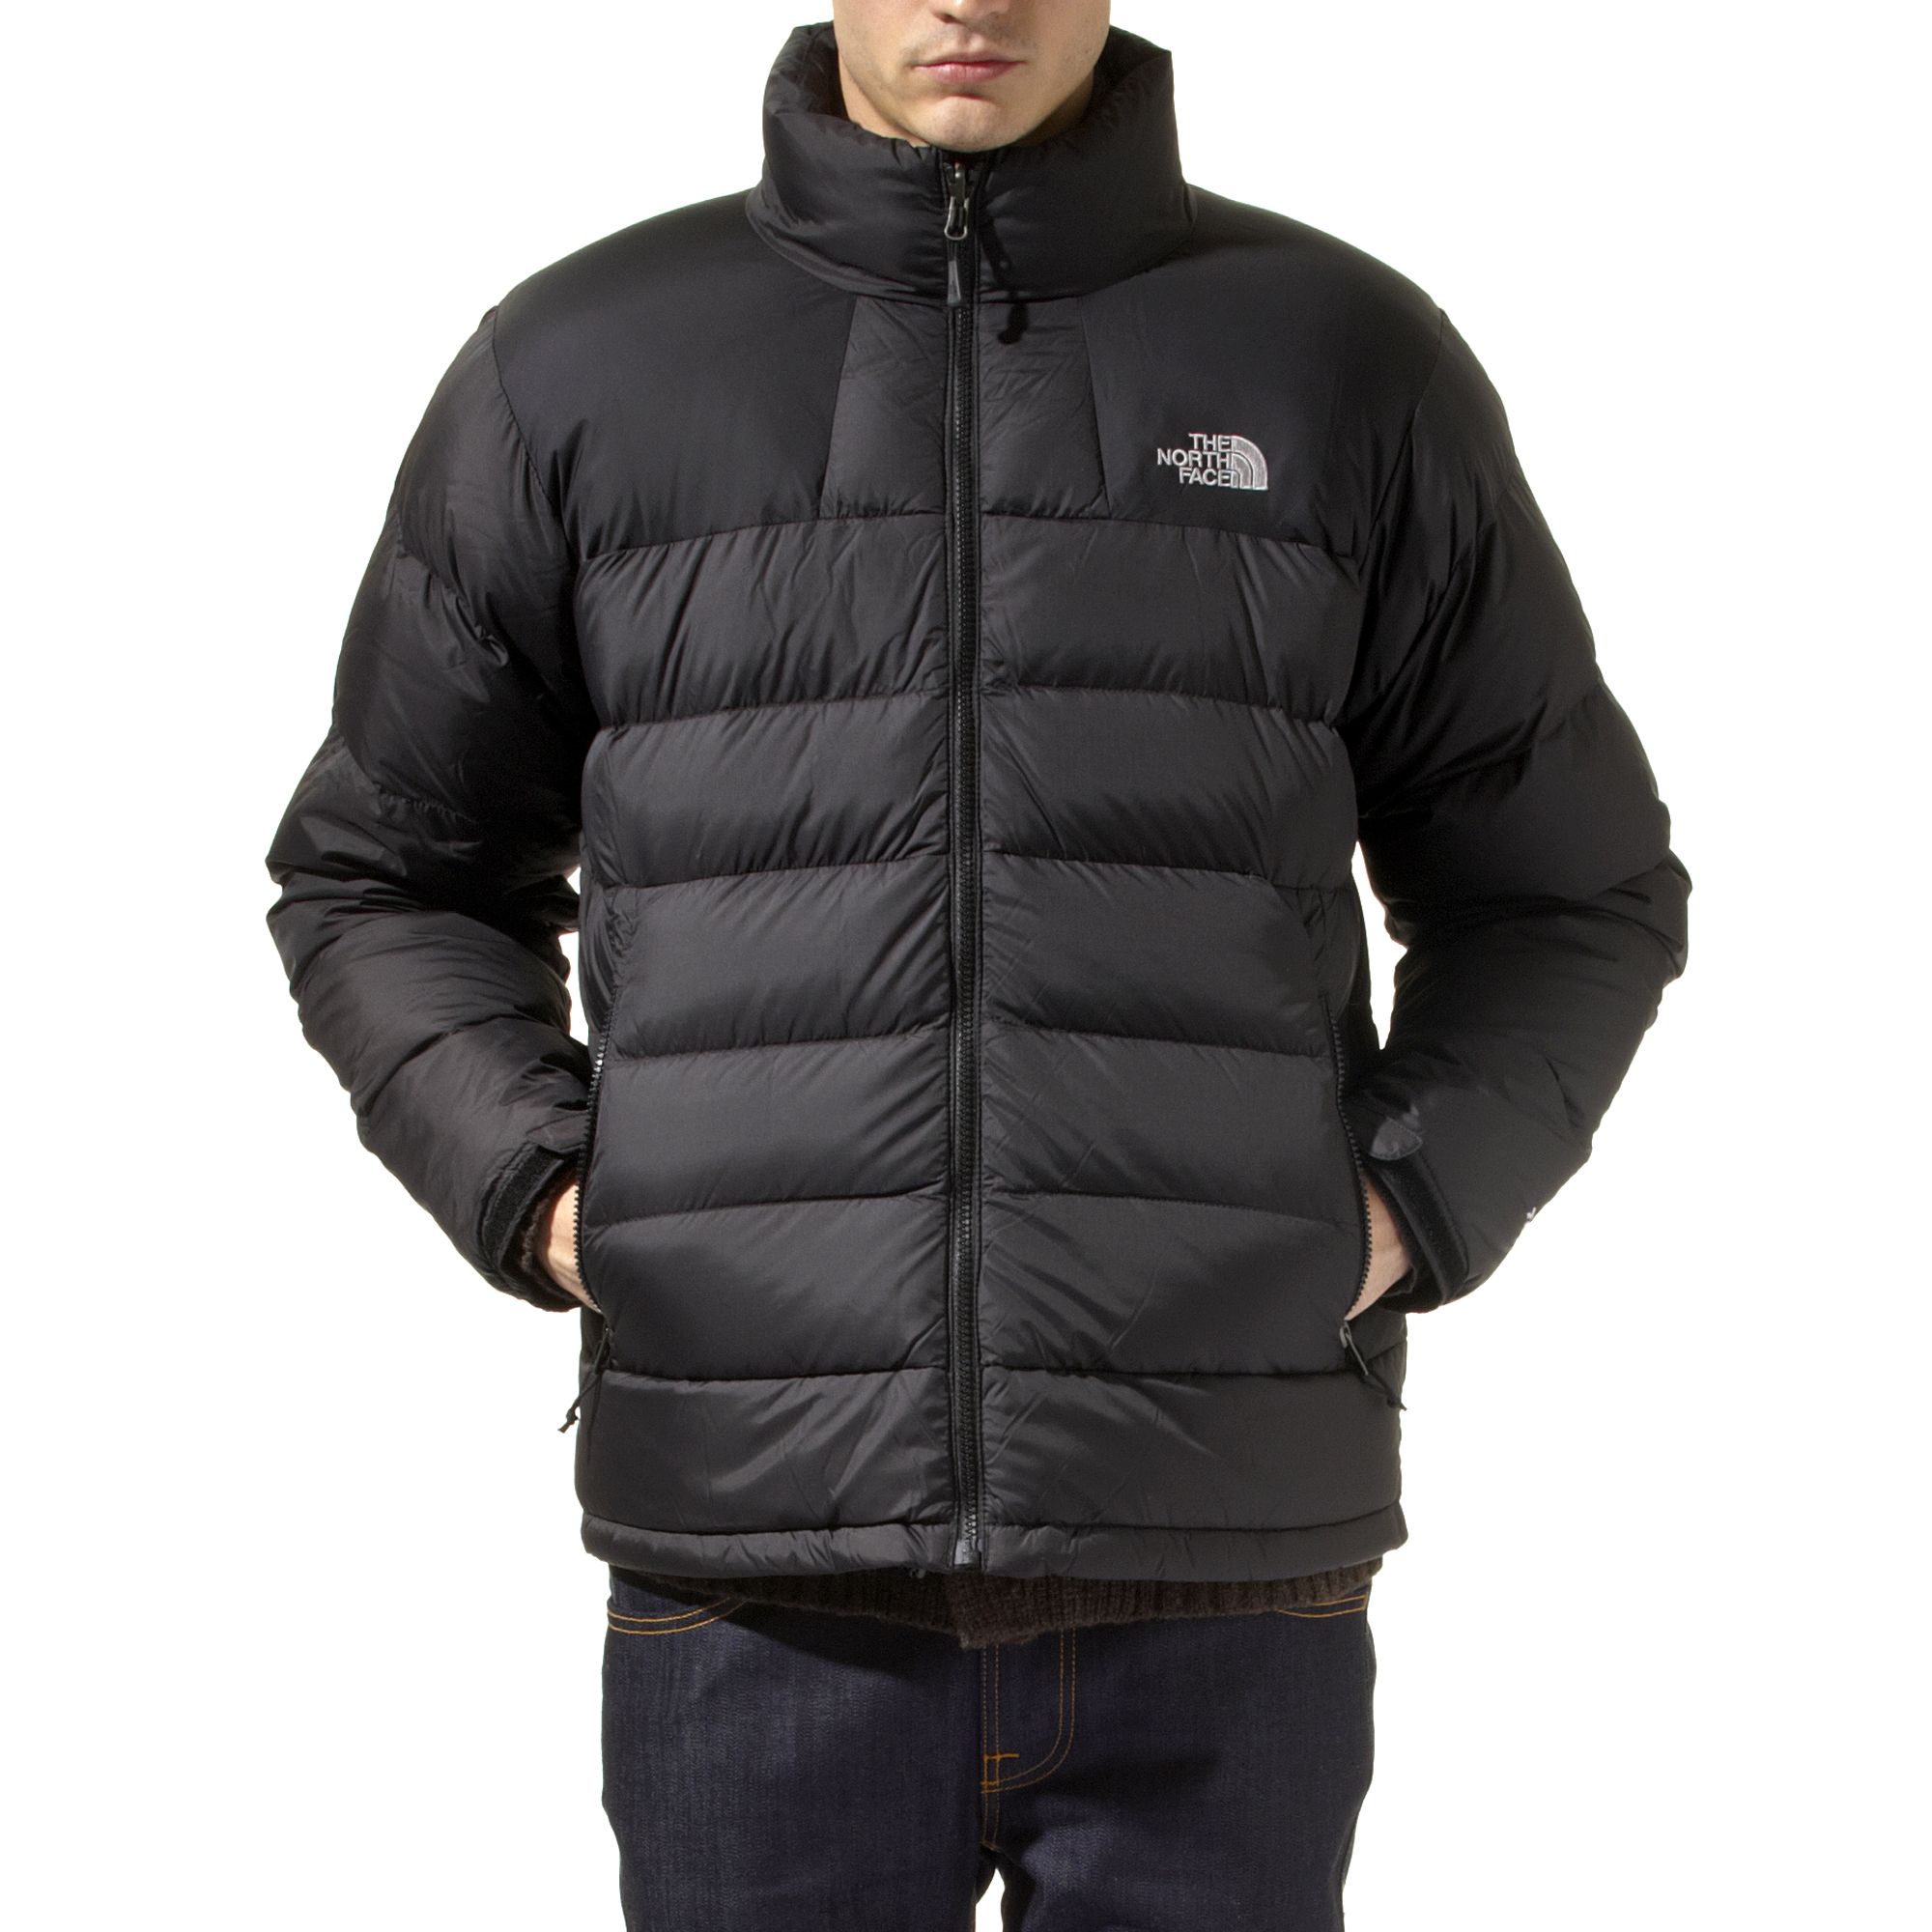 The North Face Massif Goose Down Coat in Black for Men - Lyst